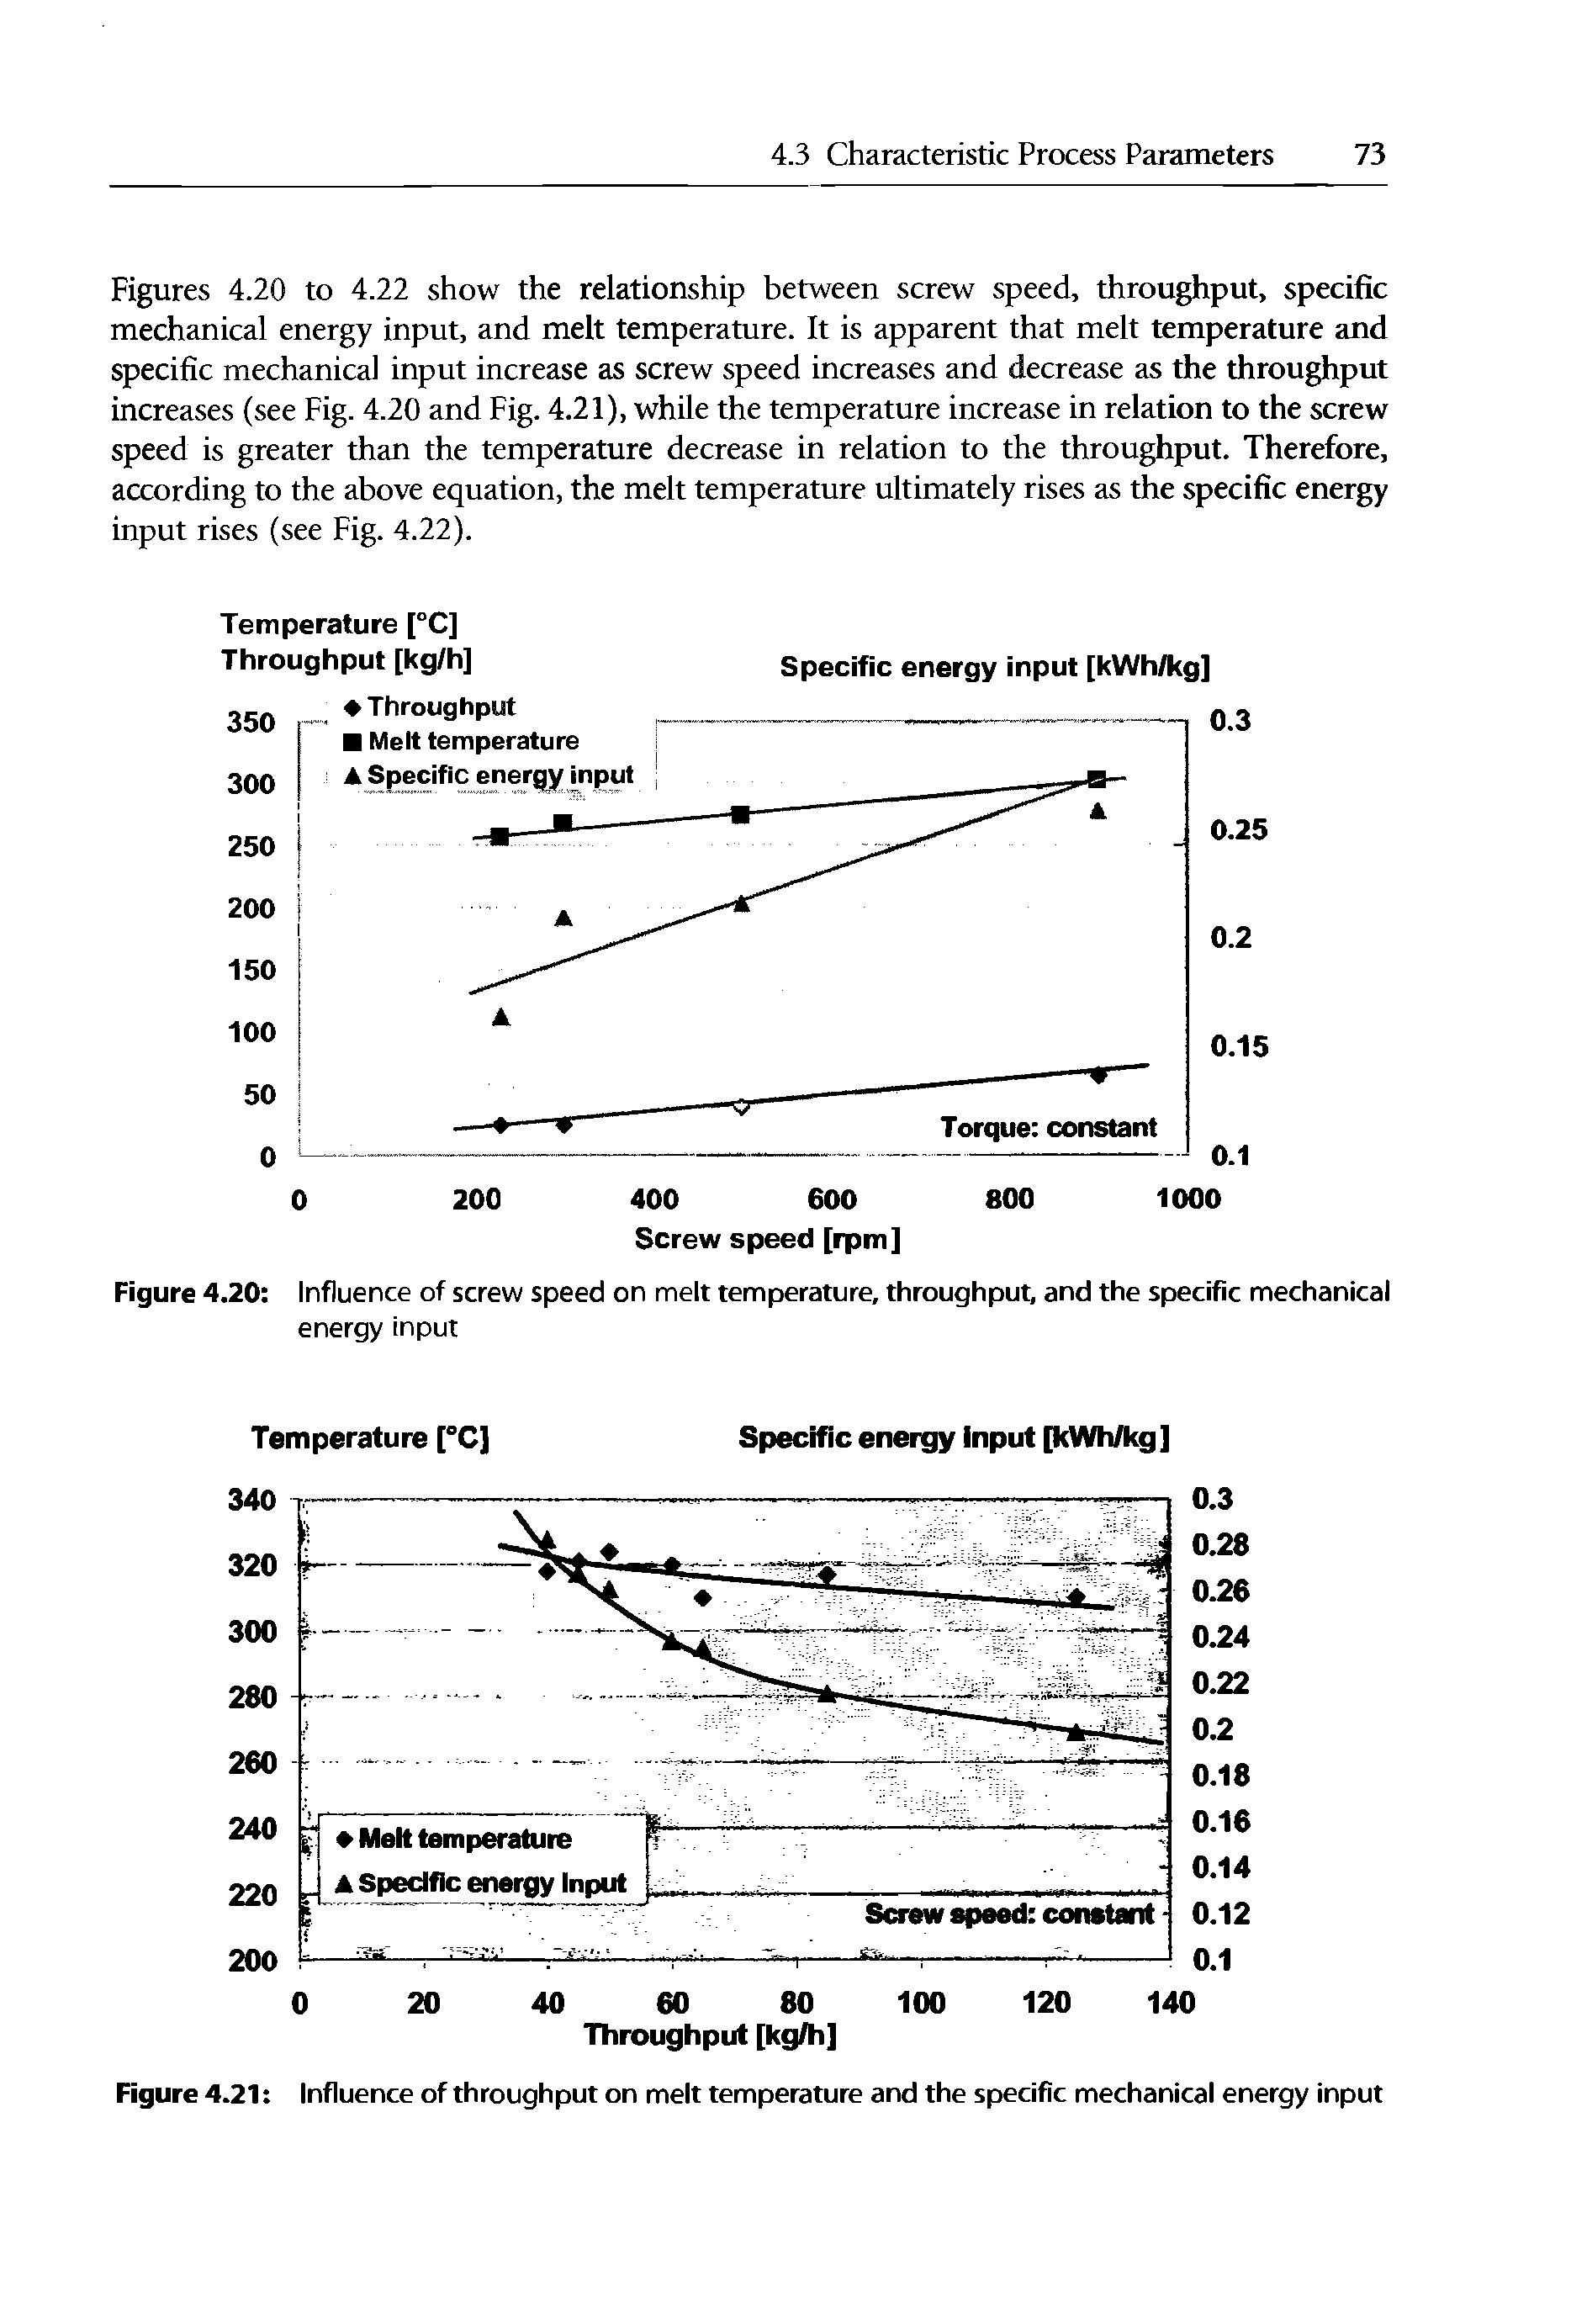 Figures 4.20 to 4.22 show the relationship between screw speed, throughput, specific mechanical energy input, and melt temperature. It is apparent that melt temperature and specific mechanical input increase as screw speed increases and decrease as the throughput increases (see Fig. 4.20 and Fig. 4.21), while the temperature increase in relation to the screw speed is greater than the temperature decrease in relation to the throughput. Therefore, according to the above equation, the melt temperature ultimately rises as the specific energy input rises (see Fig. 4.22).